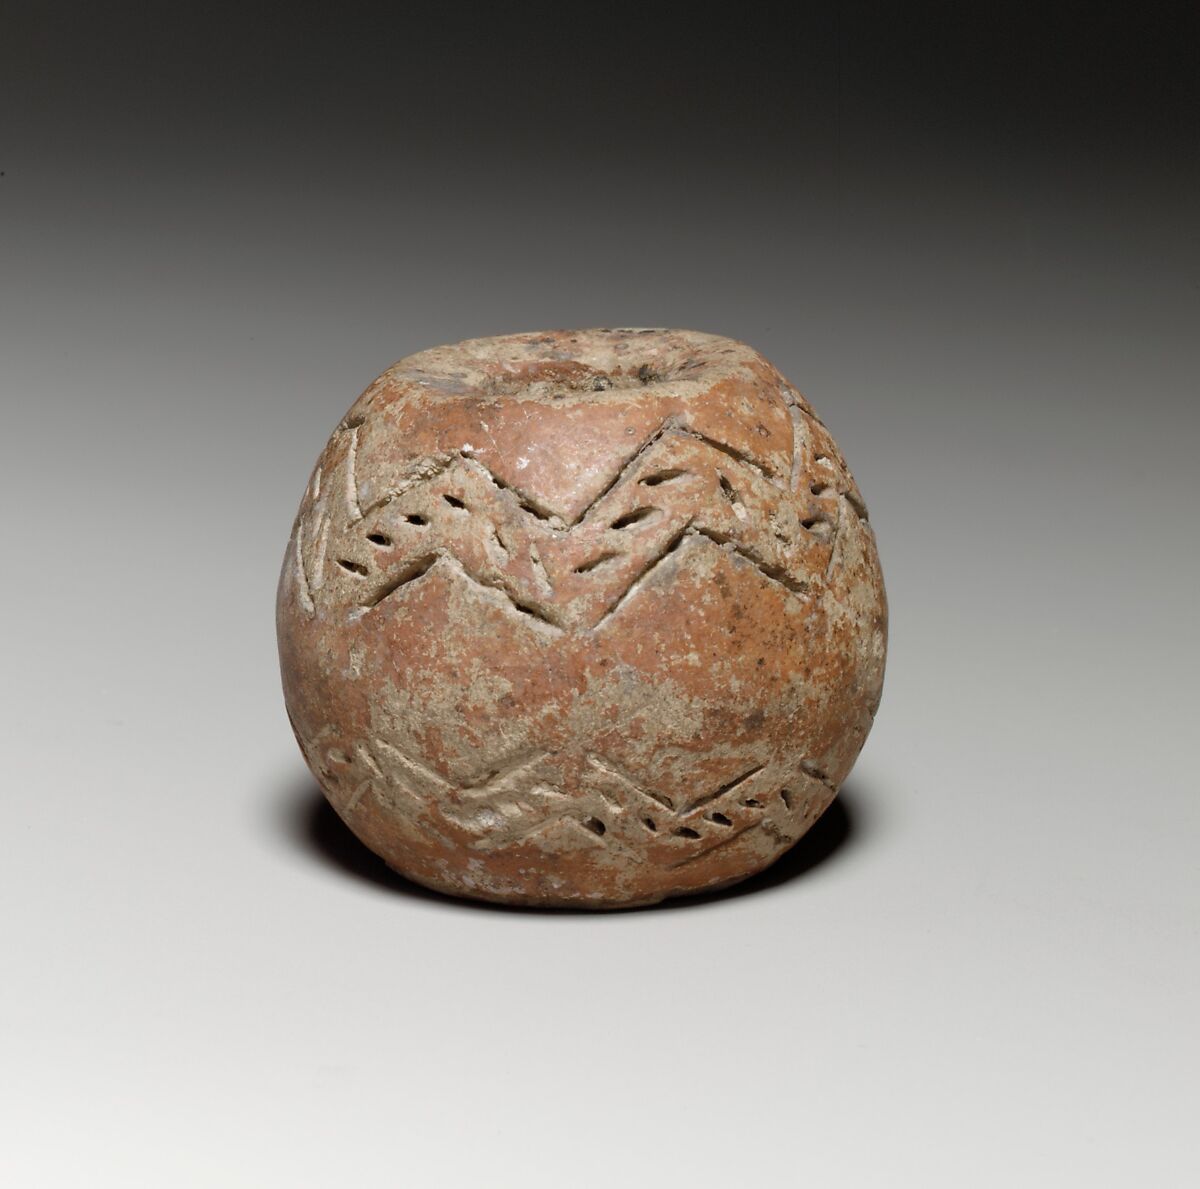 Spherical spindle-whorl with broad flat top and base, Terracotta, Cypriot 